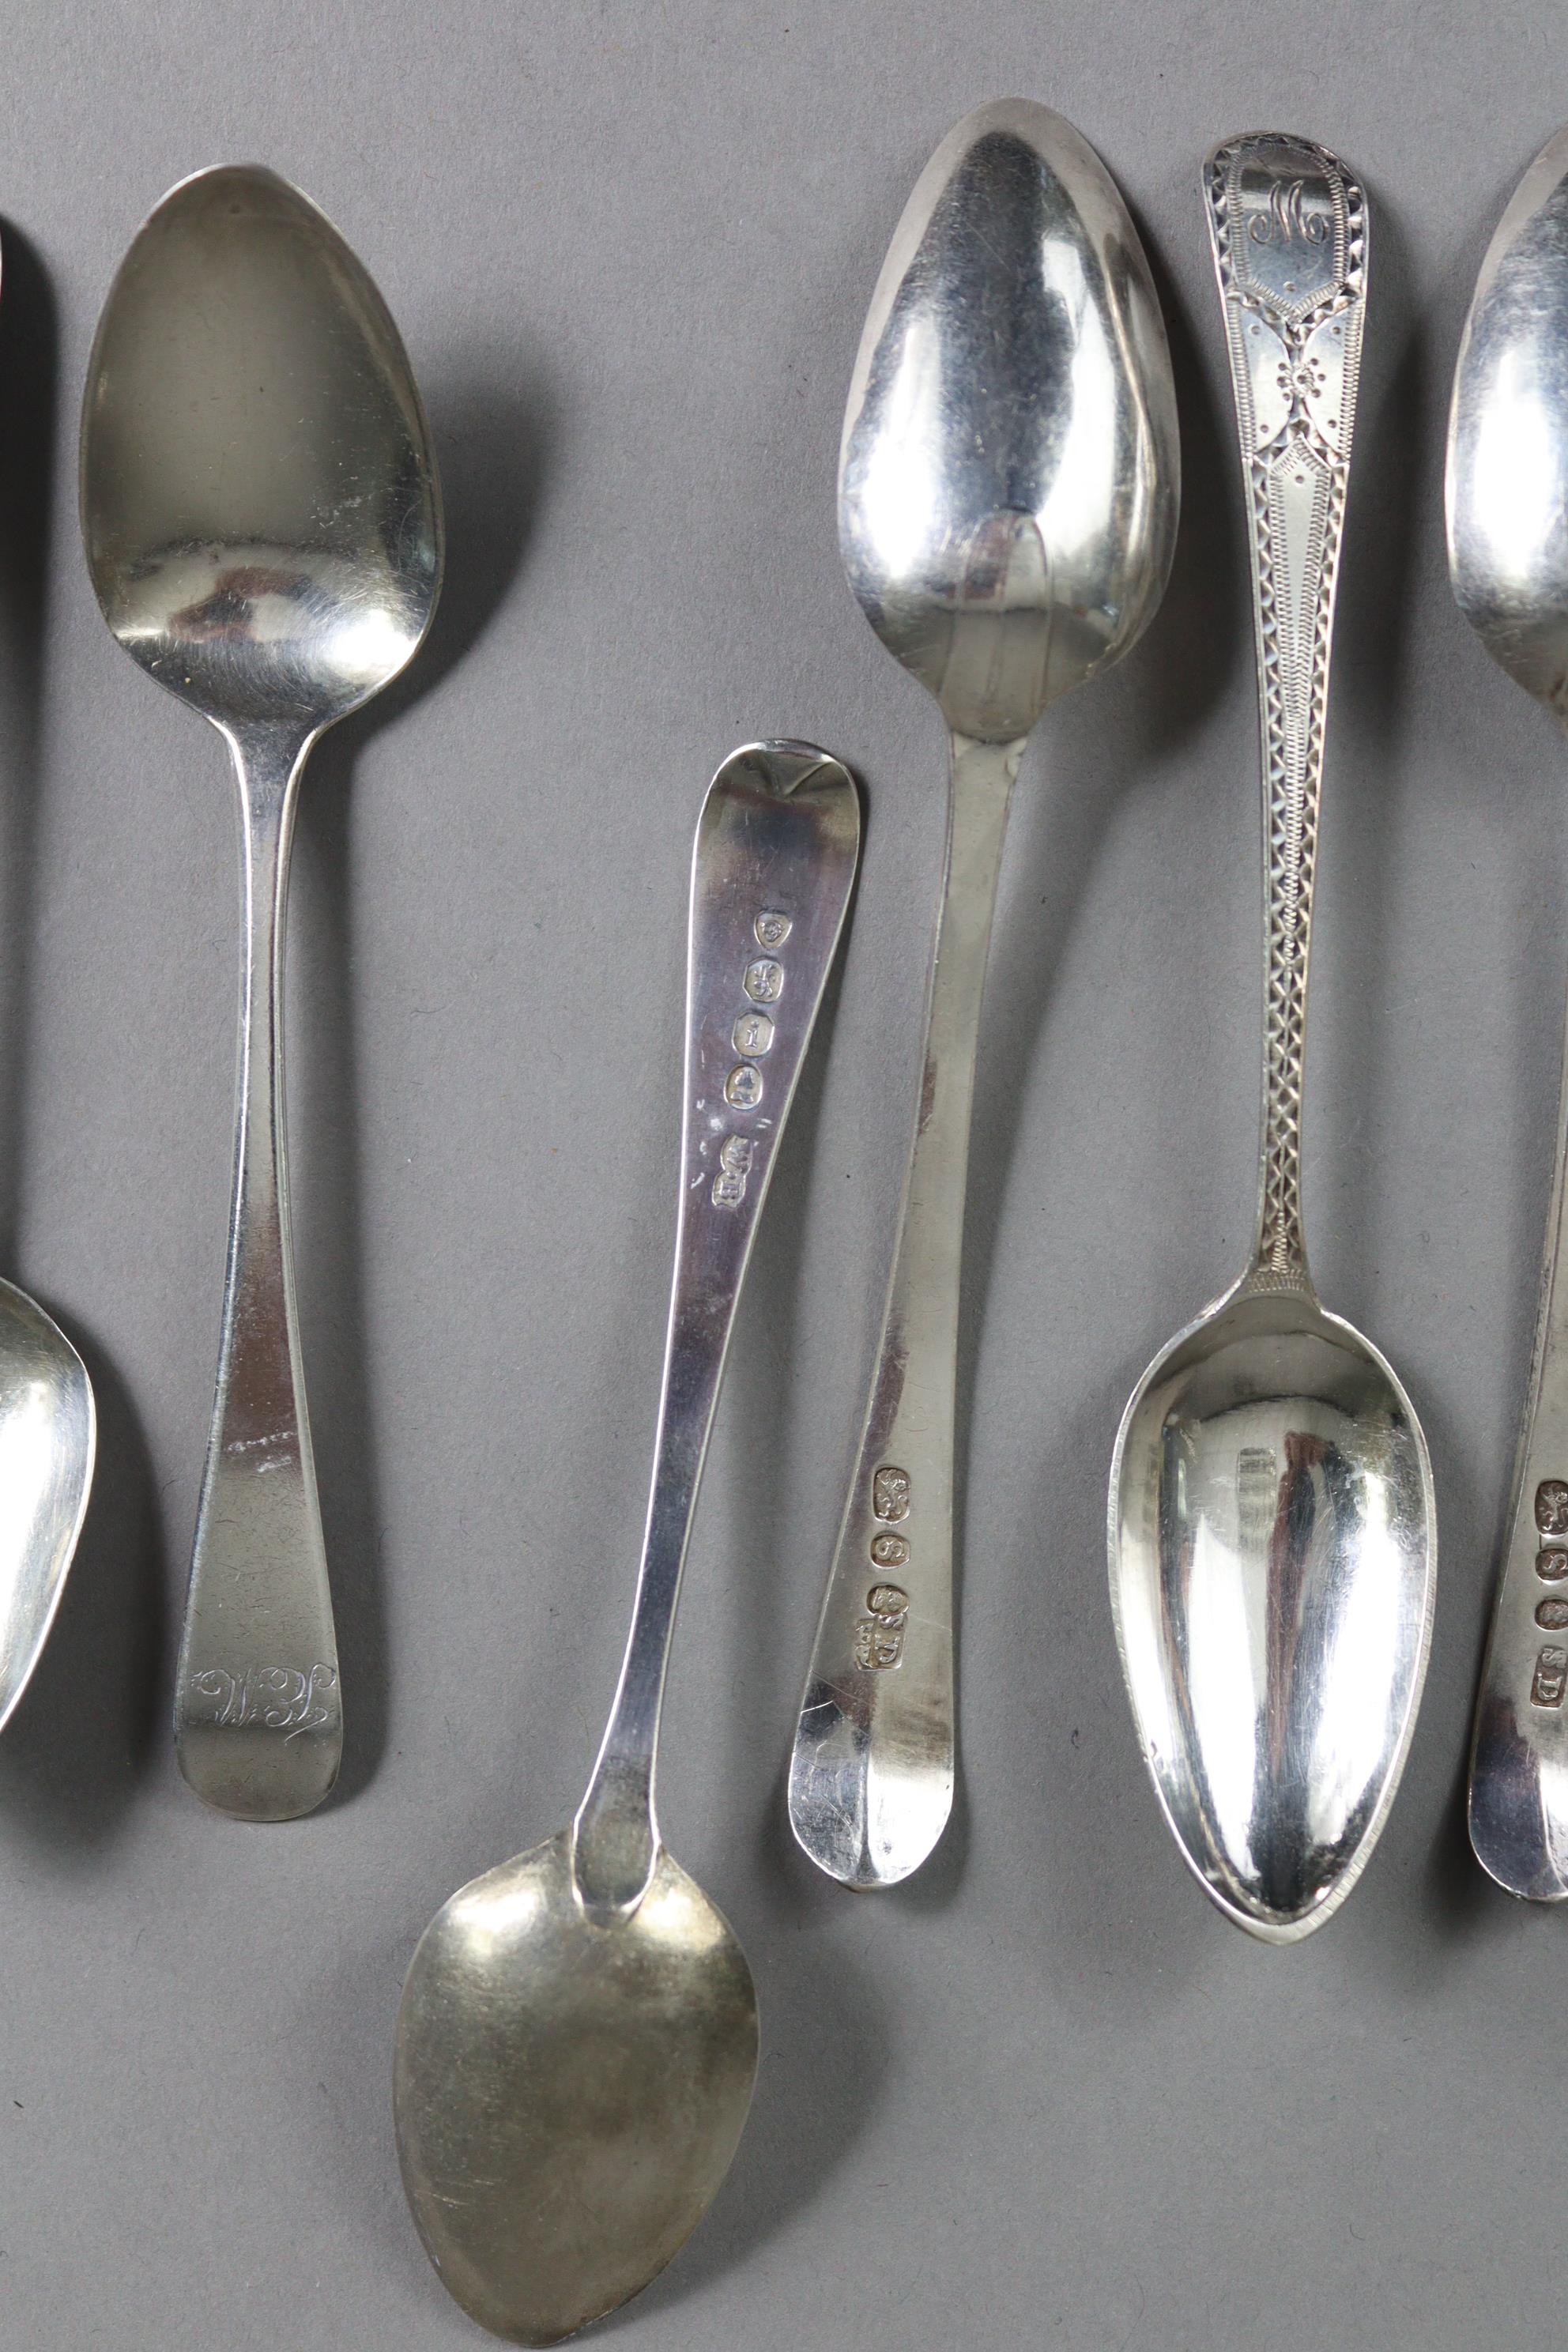 A set of six George III silver Old English bright-cut teaspoons, London 1813 by Samuel Davenport (pr - Image 2 of 2